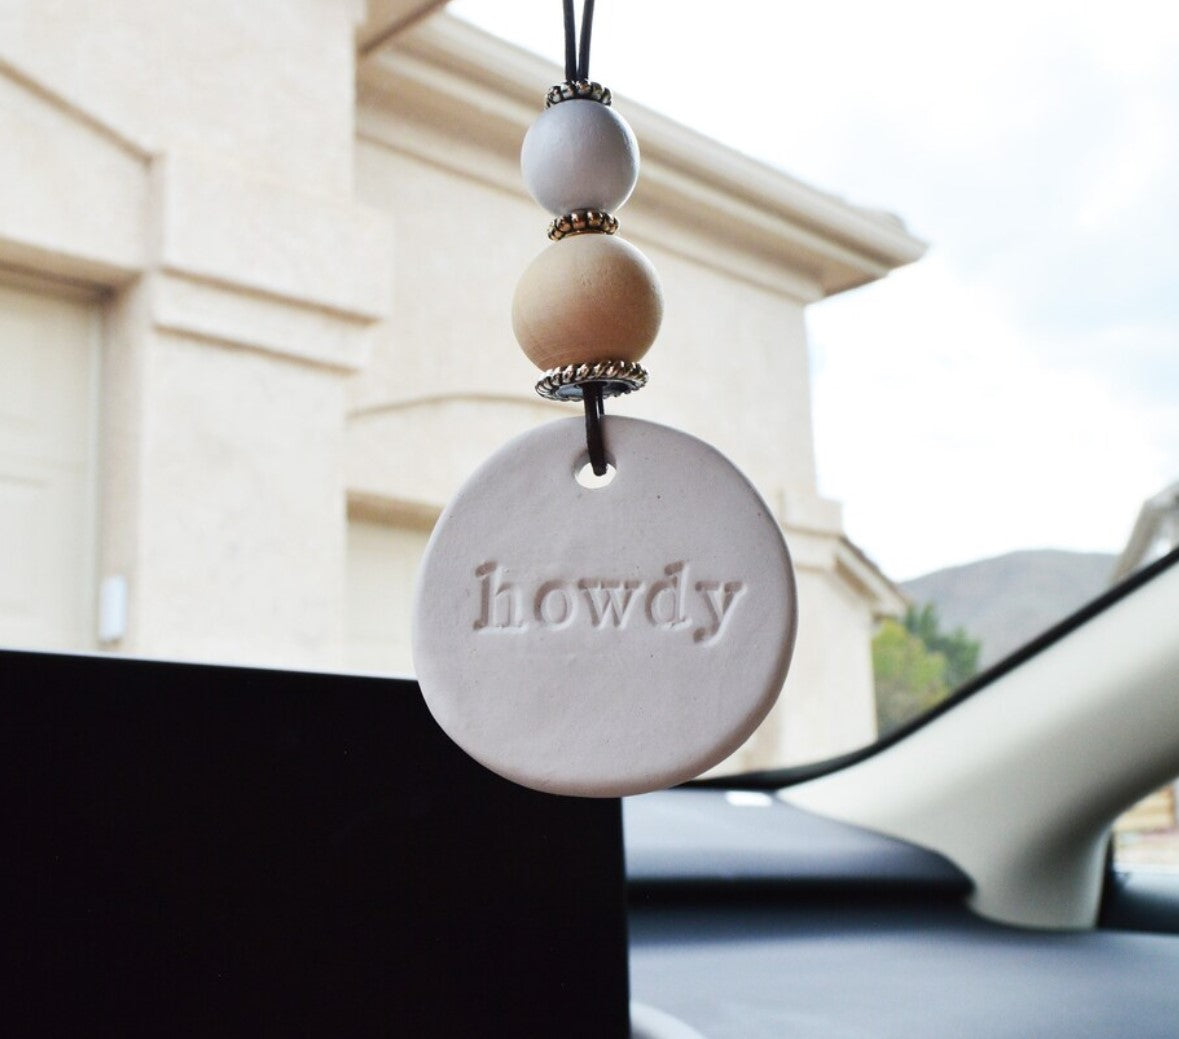 Essential oil diffuser car charm for your ride, gift for friend/ Hippie boho Rear view mirror ornament decor / ~~ howdy ~~